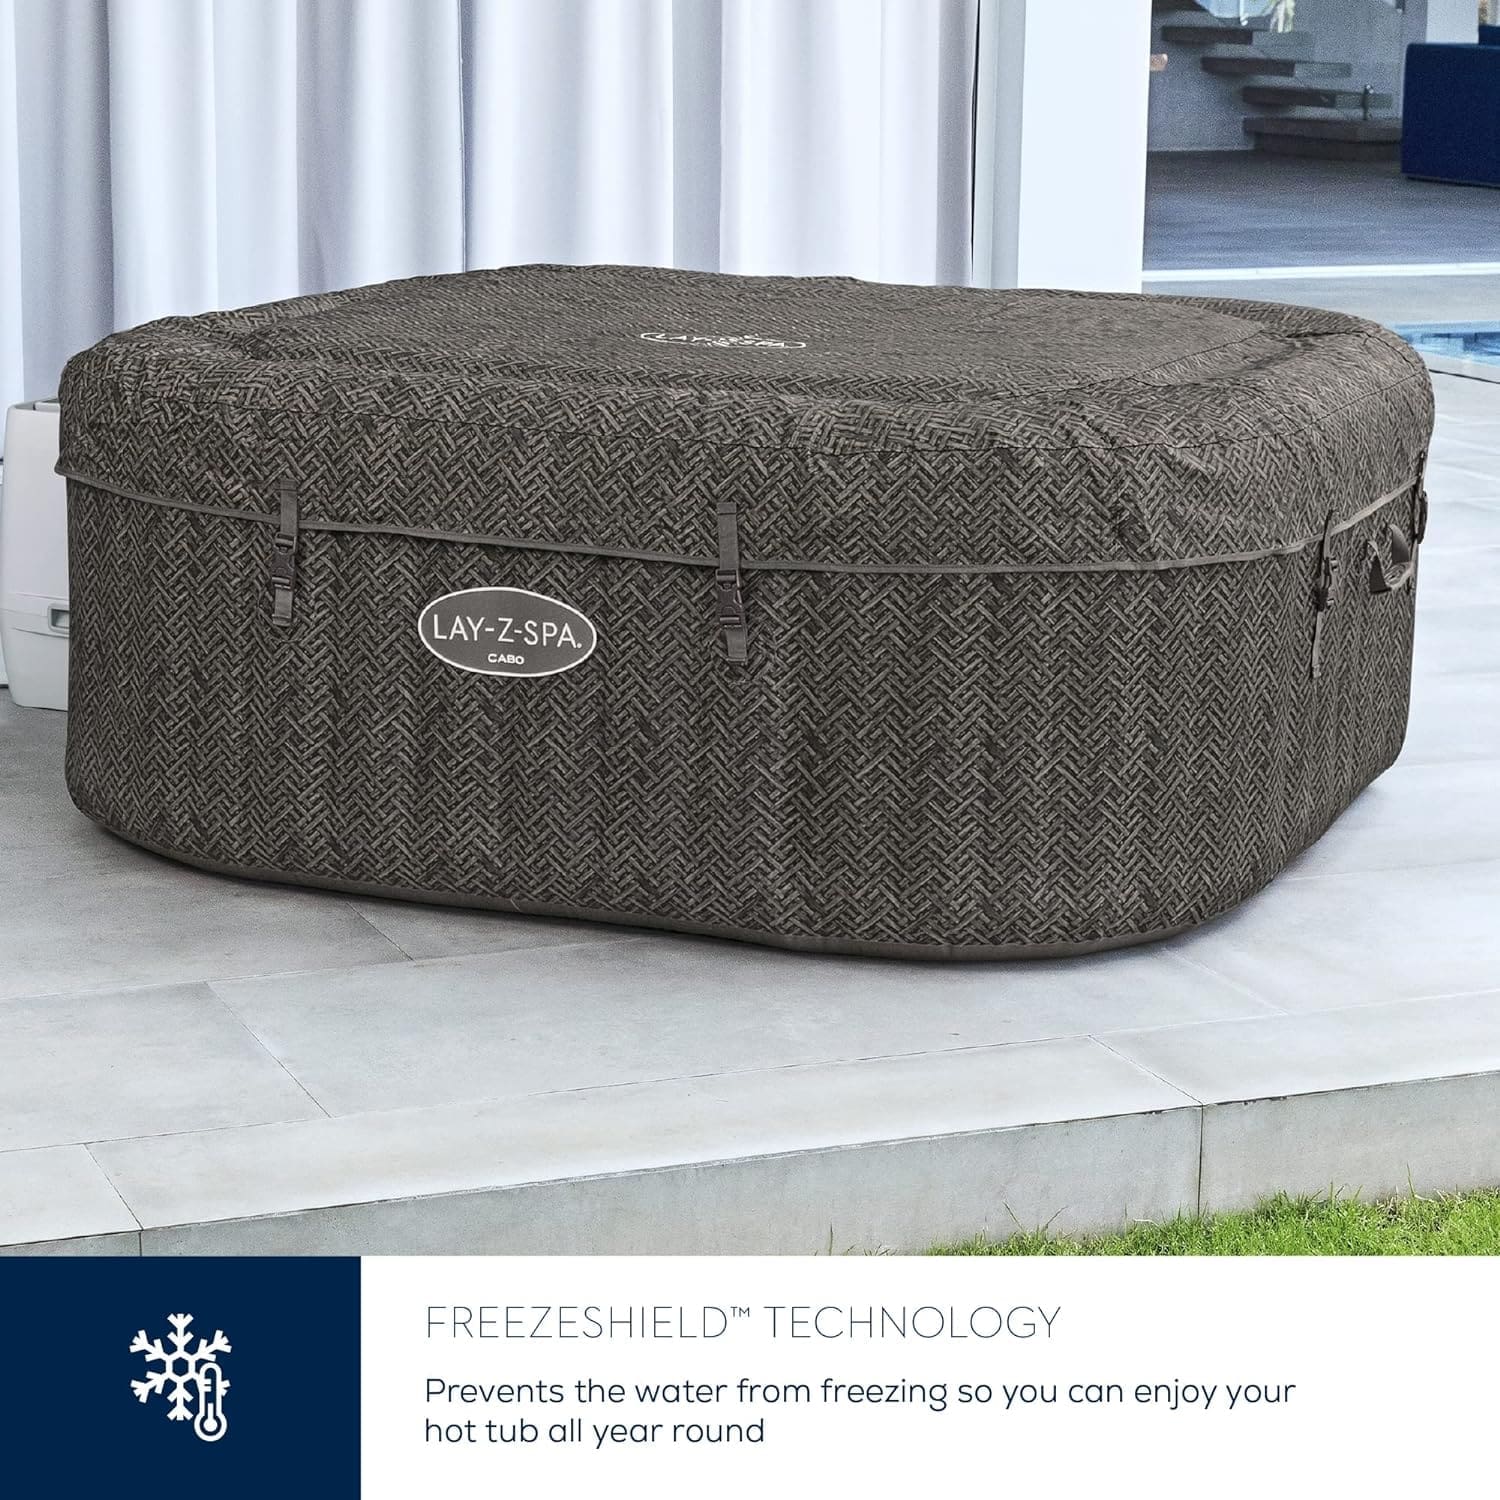 Lay-Z-spa Cabo Hydrojet Hot Tub - With Cover Review